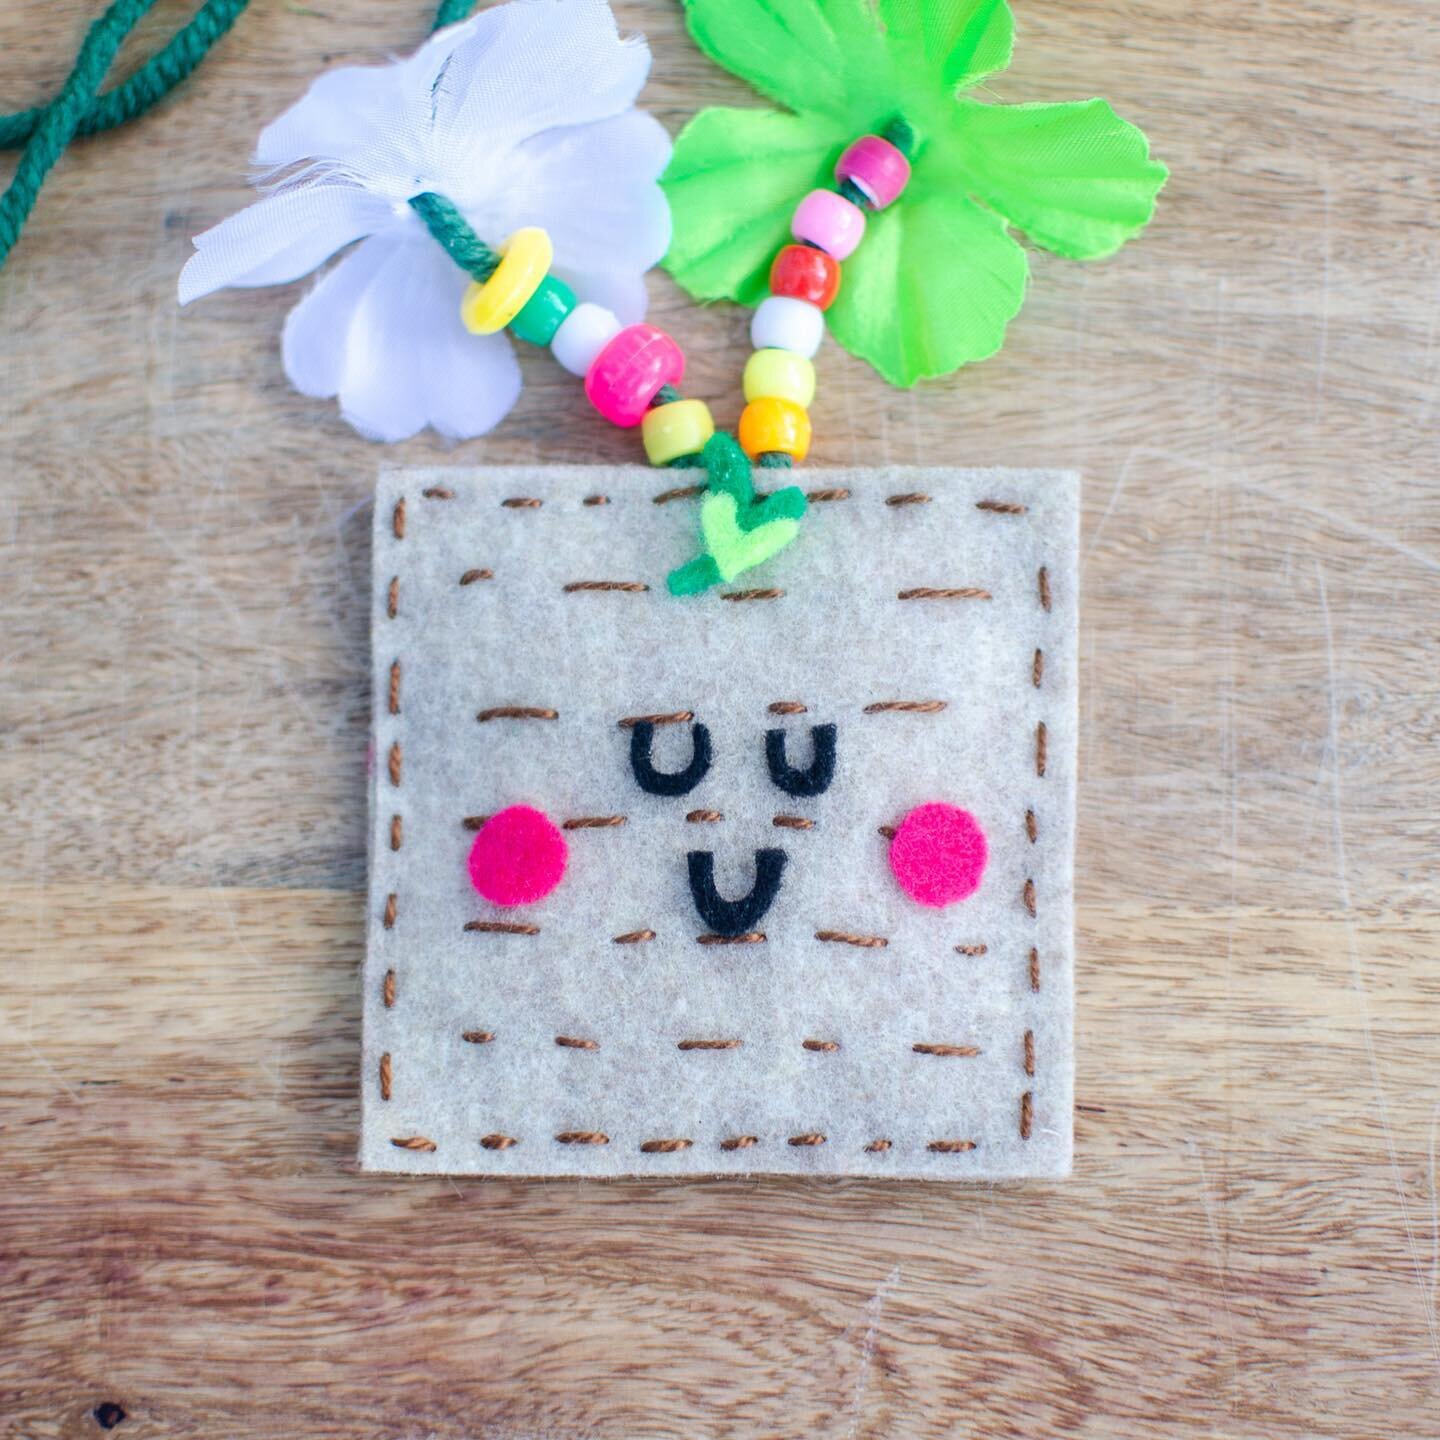 DIY: Puffy Matzah Necklace 🌺🌹🌸

Yay! Passover begins this Friday night, April 15th! My friends and I are sharing some creative ways to celebrate!! 🌸

Did you know that Passover is also called Chag HaMatzot - The Festival of Matzah? We&rsquo;re ce